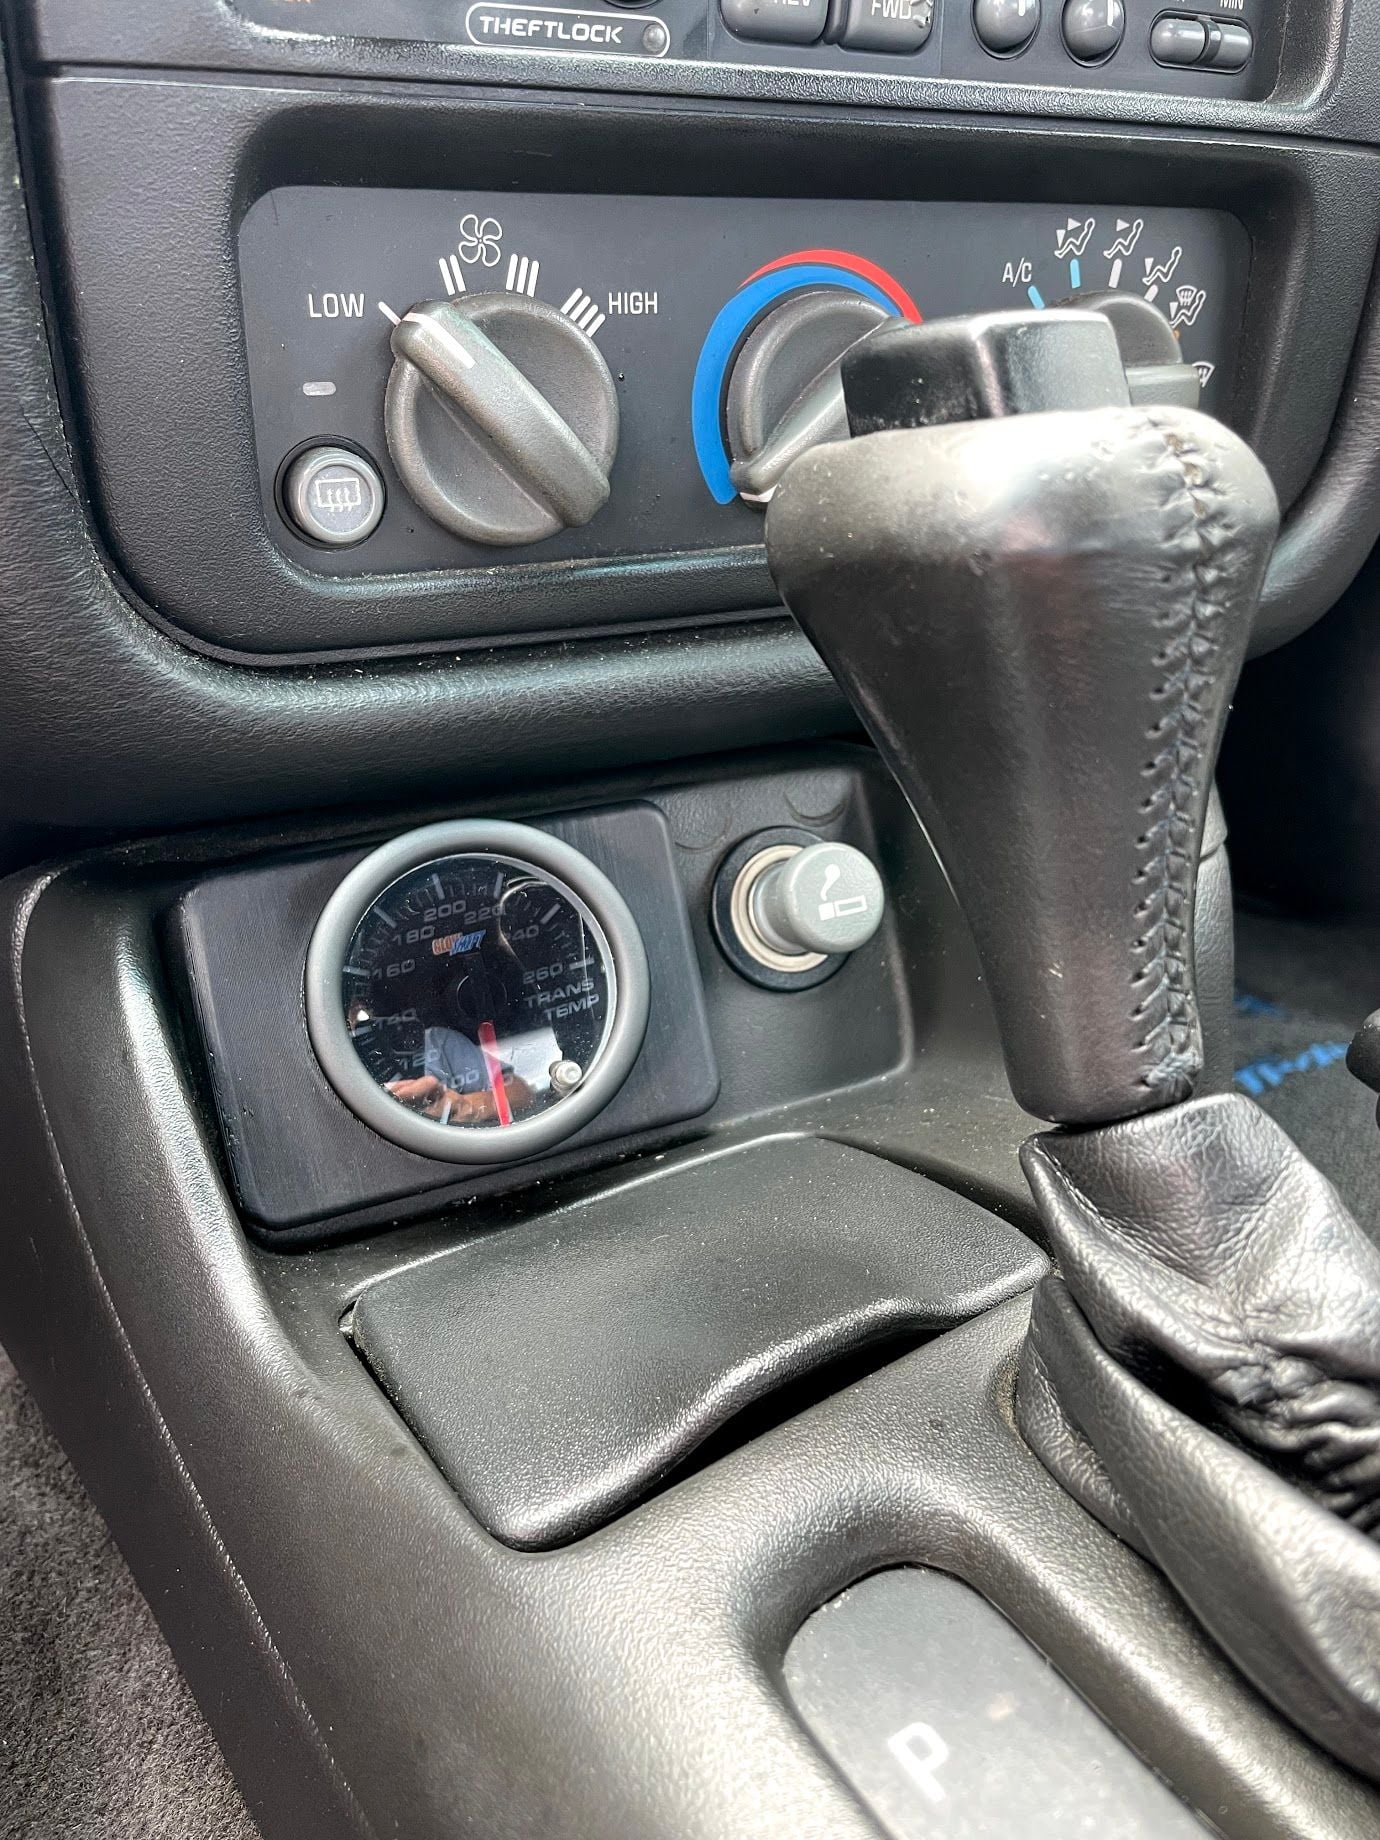 Interior/Upholstery - 3D Printed Center Console Gauge Pod - New - 0  All Models - Metairie, LA 70005, United States